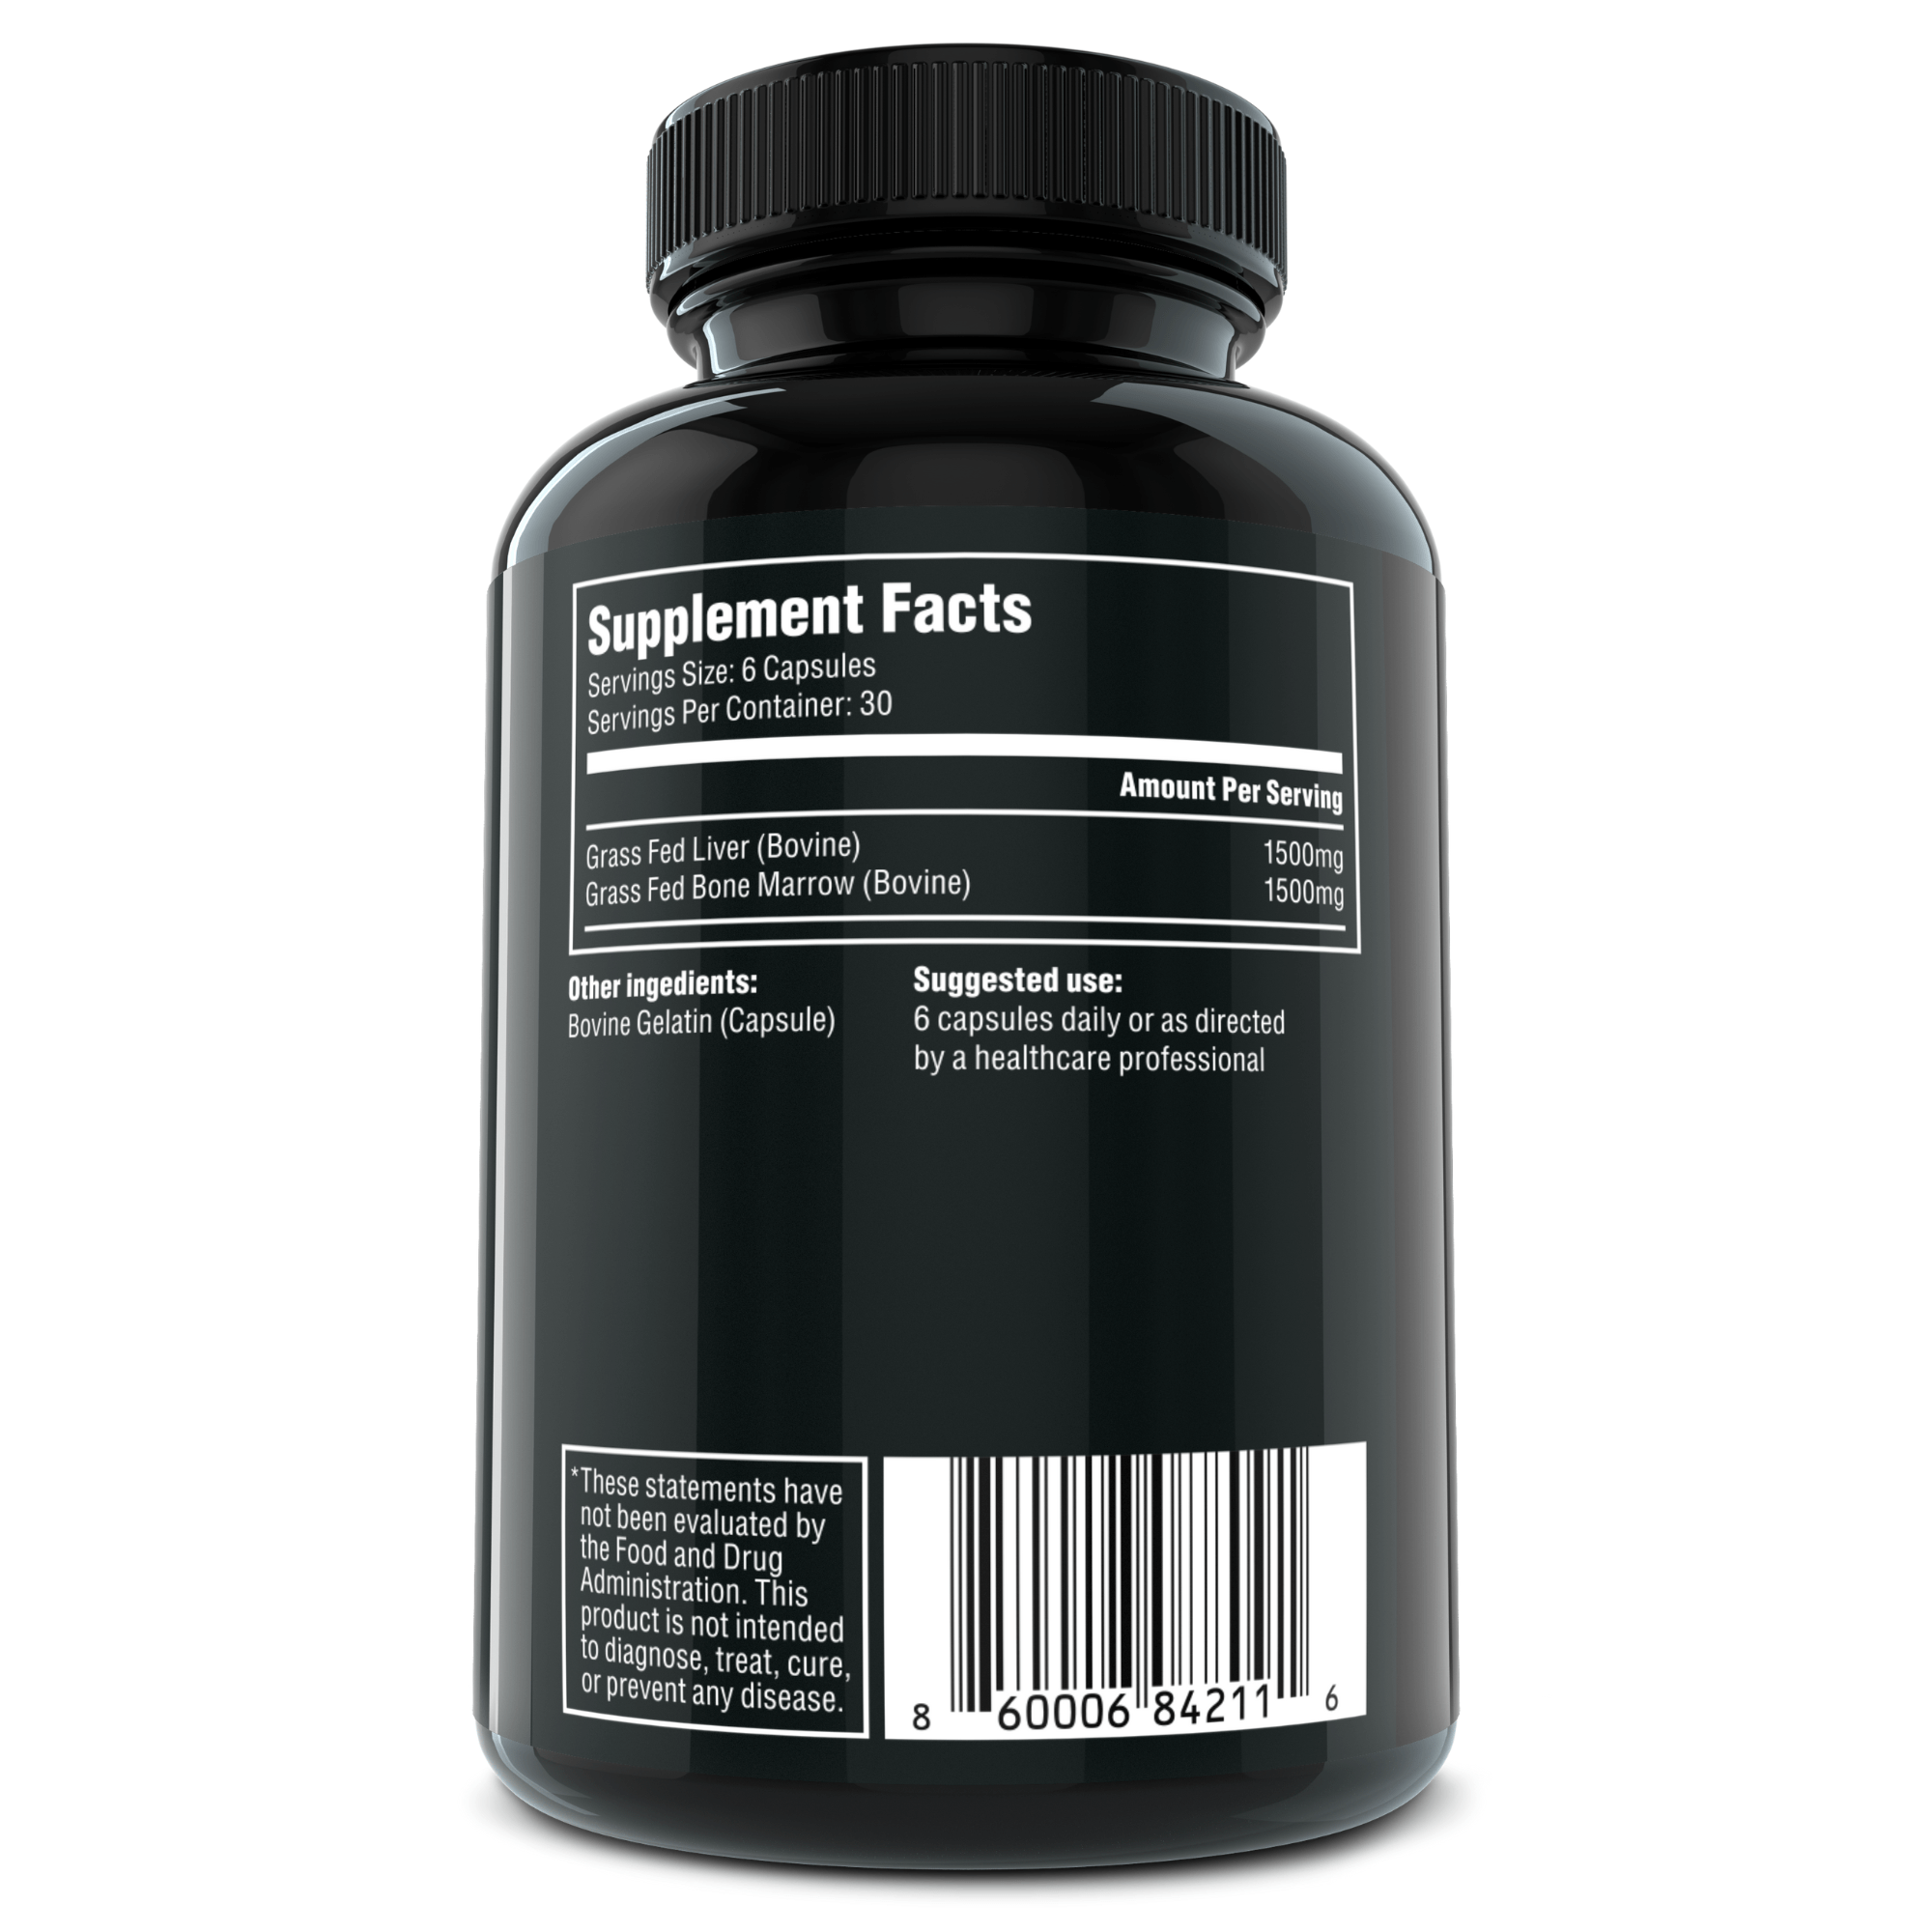 Bottle of Armor showing the back label with supplement facts panel for view